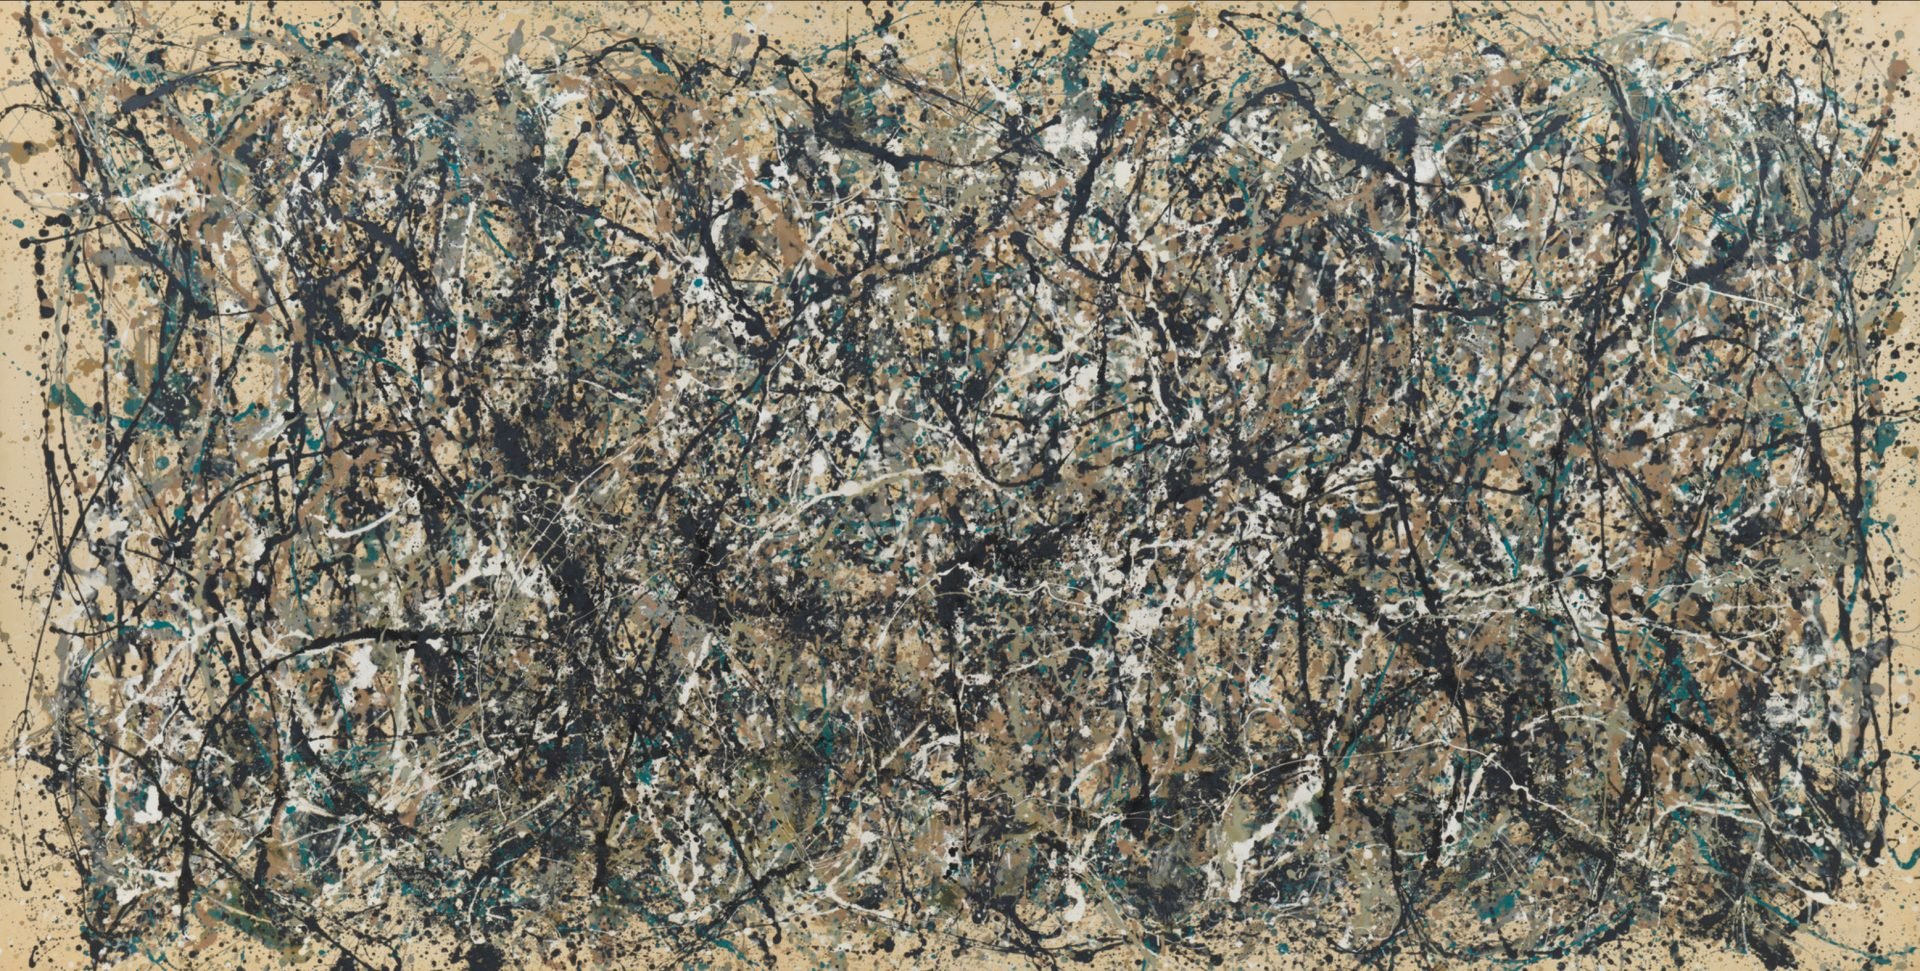 Pollock's 'One: Number 31, 1950' showcases his signature “drip” technique in Abstract Expressionism. The expansive canvas, laid on the ground during creation, features dynamic strings of enamel in tans, blues, grays, black, and white, conveying energy and movement. The painting merges forceful application with intricate detailing and lyricism.